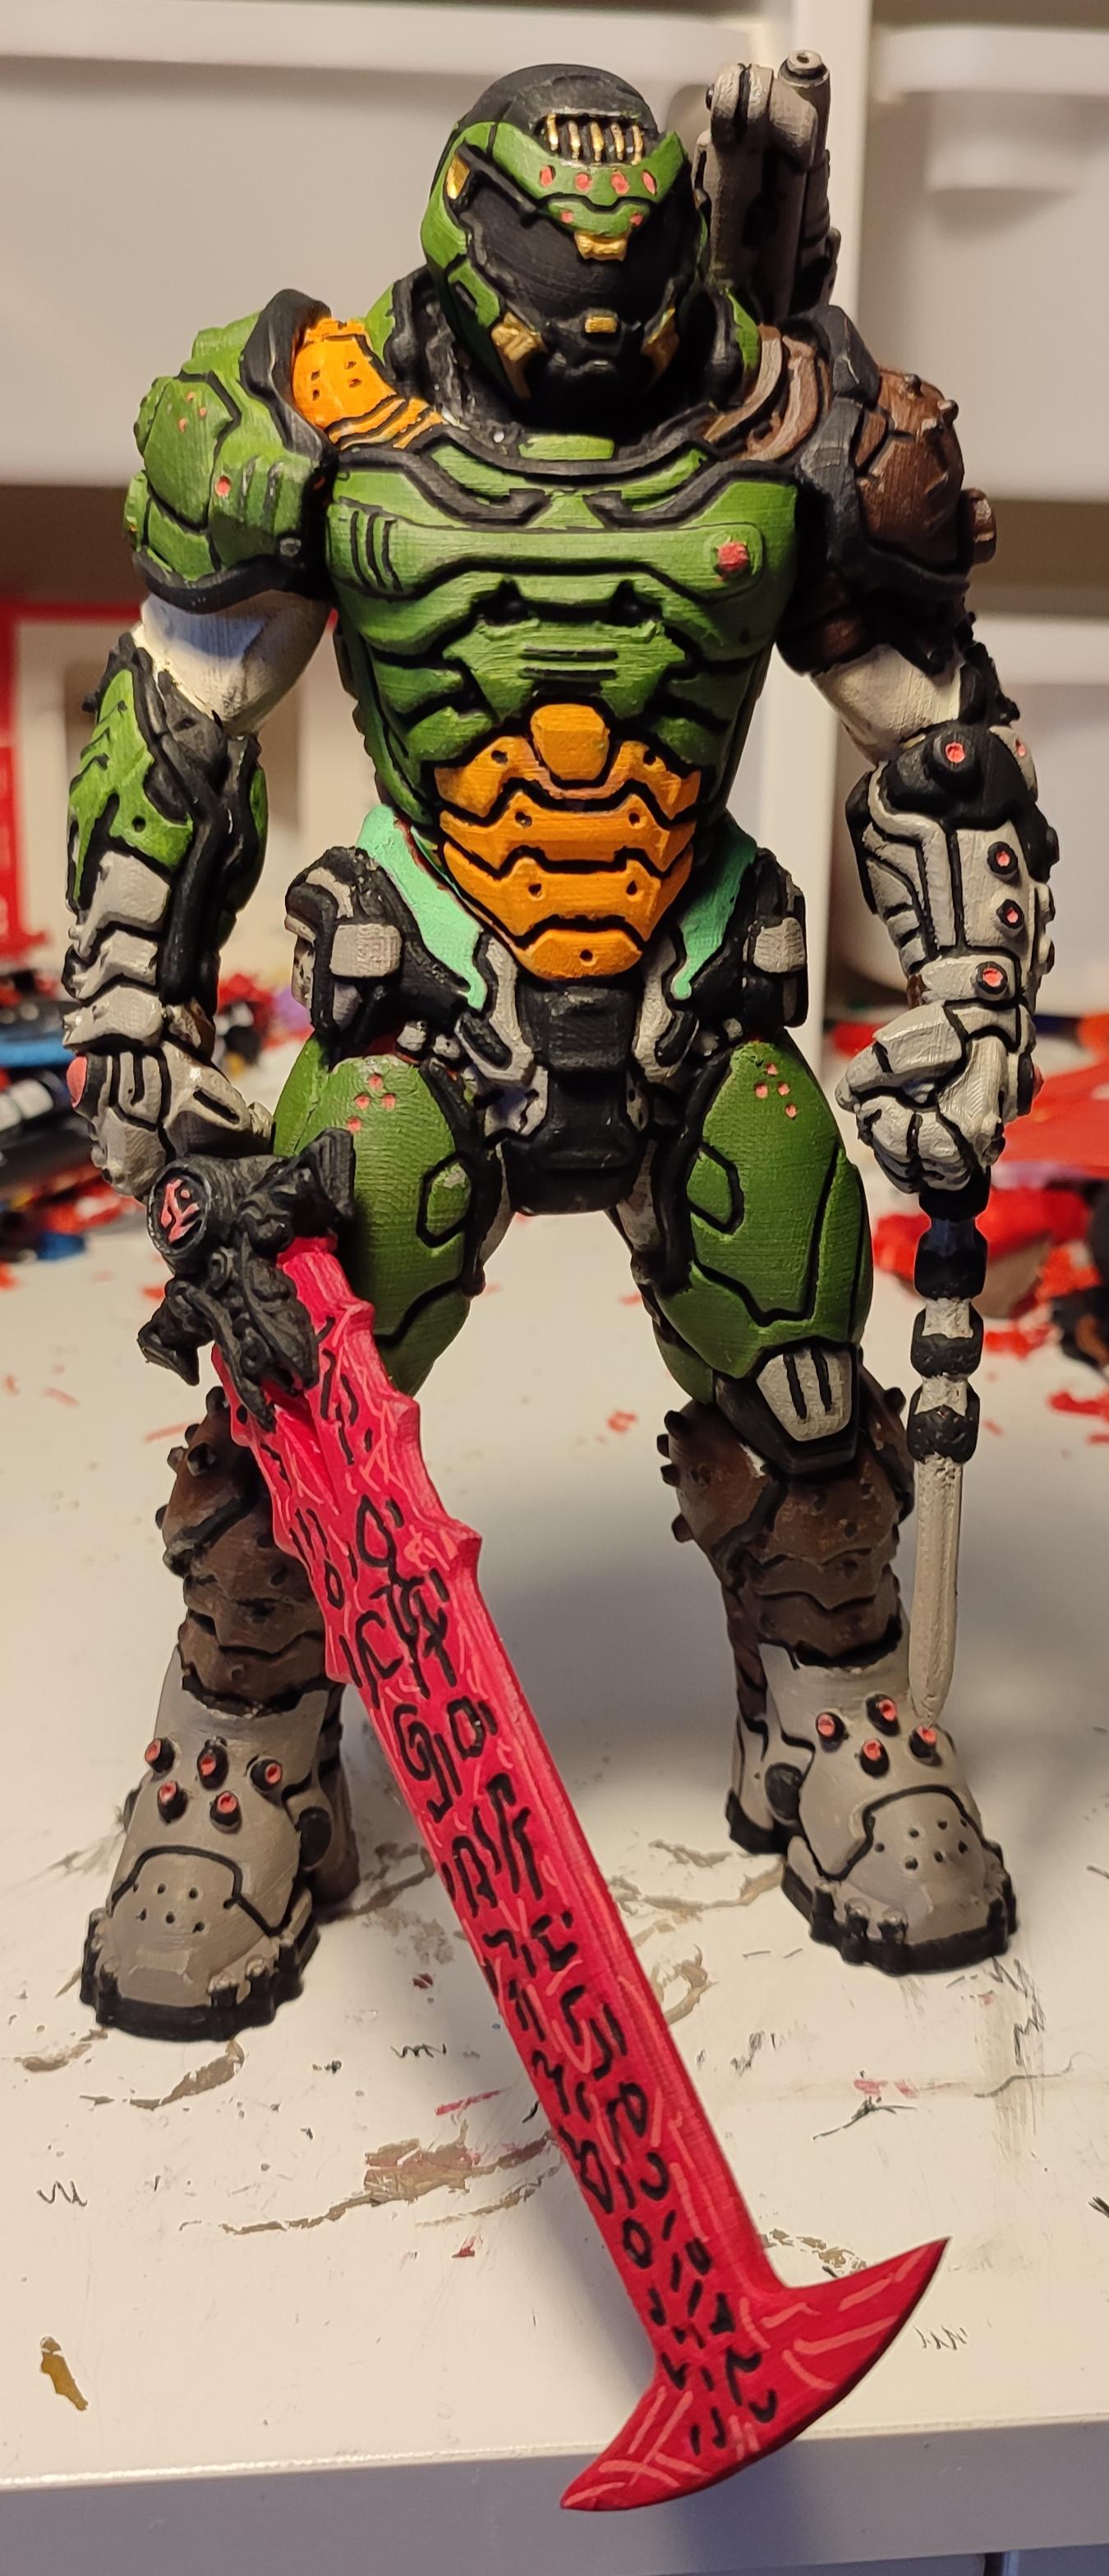 Bethesda ANZ & SE Asia on "Okay, we are really digging the paint job on this 3D printed DOOM Slayer by Egrd4 on Reddit. Looking straight out of the Borderlands! #DOOM #